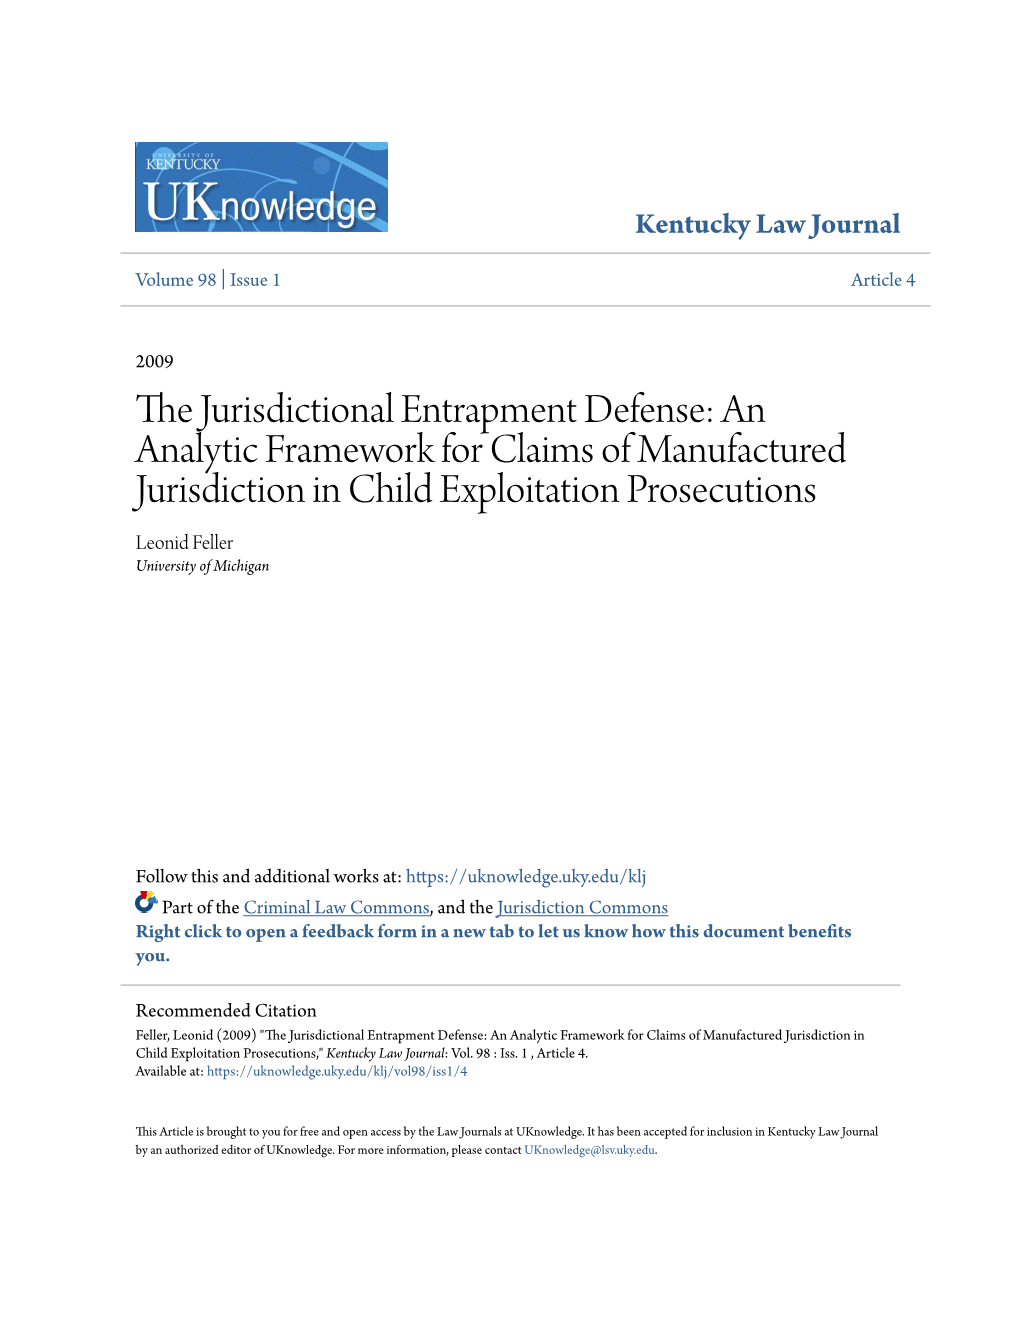 The Jurisdictional Entrapment Defense: an Analytic Framework for Claims of Manufactured Jurisdiction in Child Exploitation Prosecutions